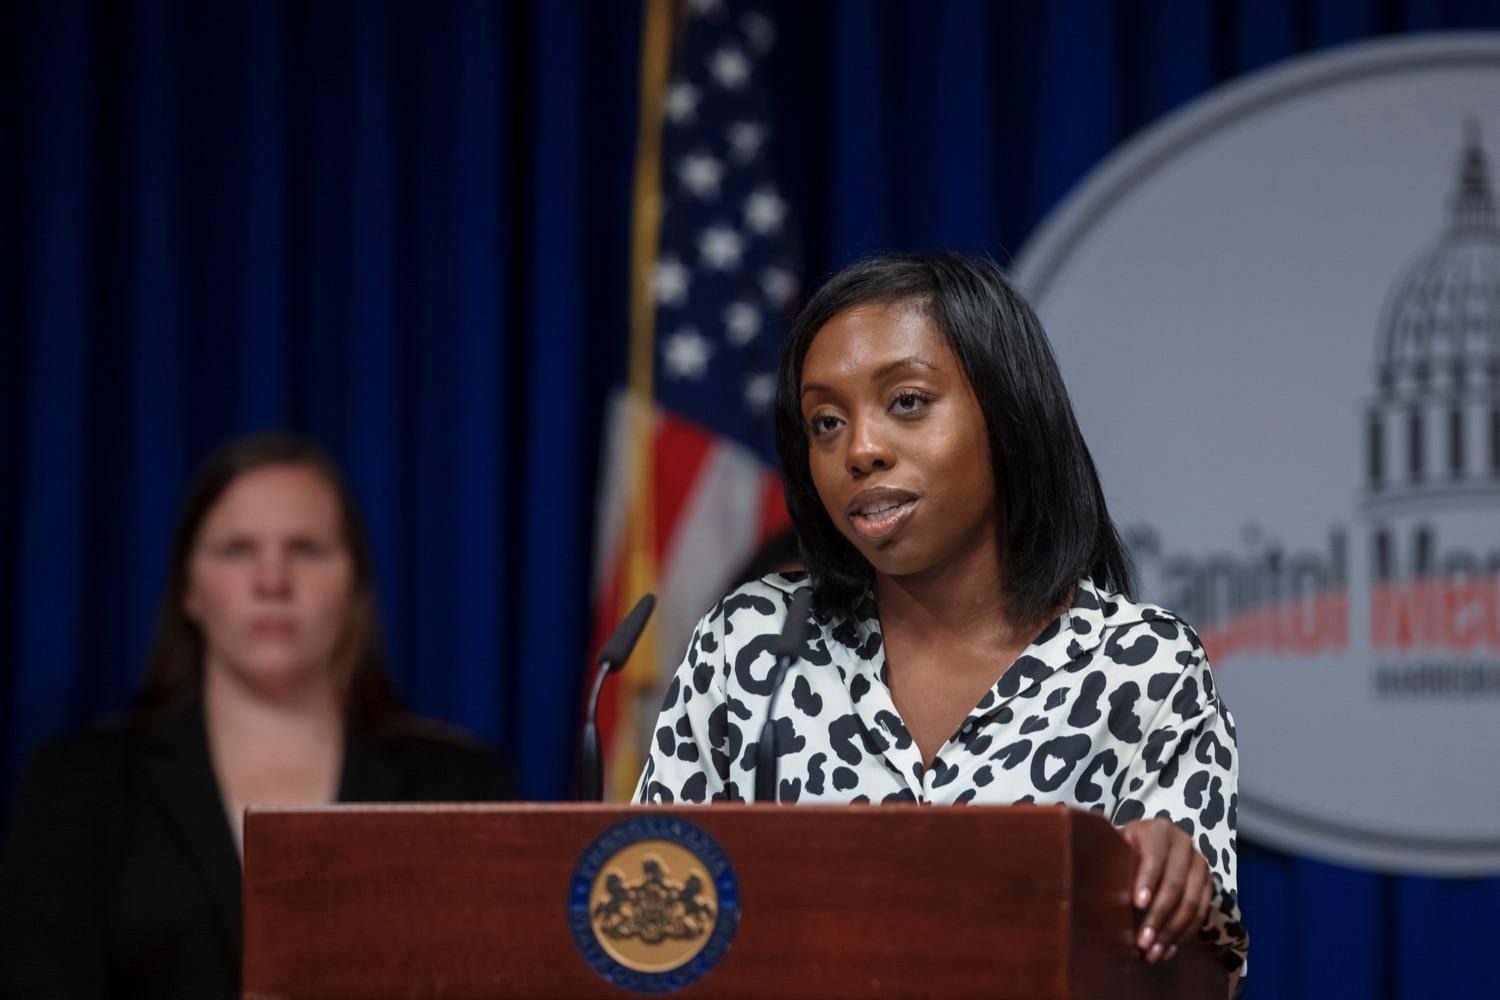 LaDeshia Maxwell, executive director of the Commission on African American Affairs, speaks during a press conference, which highlighted the Wolf Administrations efforts to expand voter access, inside the Capitol Media Center on Tuesday, September 13, 2022. The press conference reminded Pennsylvanians Oct 24. is the deadline to register to vote in the November election. Whether a voter is requesting a no-excuse mail-in ballot from the comfort of their home or showing up to the polls on Election Day and proudly wearing an I voted sticker, voting is a constitutional right and a way for people to make their voice heard, Acting Secretary of State Leigh M. Chapman said. I am honored to be part of an administration that continues to work hard so everyone has equal access to the ballot box. .<br><a href="https://filesource.amperwave.net/commonwealthofpa/photo/22138_CFW_VotingPA_NK_019.JPG" target="_blank">⇣ Download Photo</a>